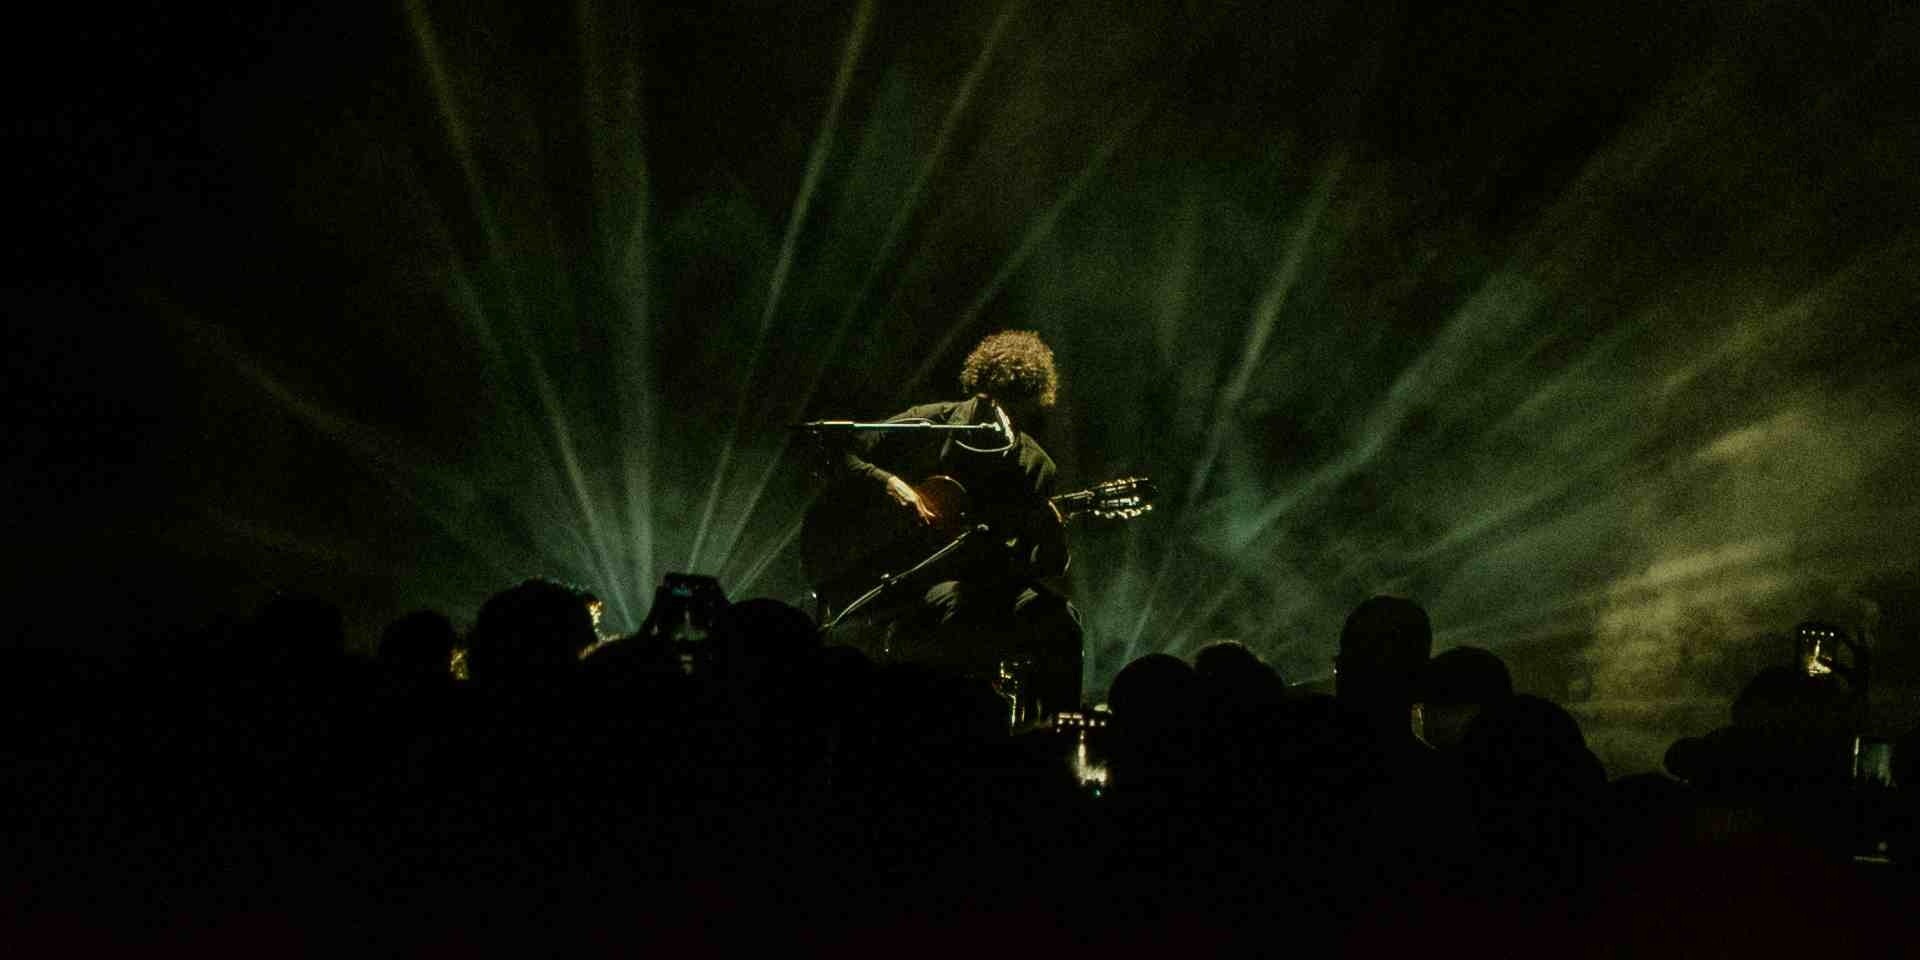 José González delivers a mesmerising, stripped-down performance at Singapore show – gig report